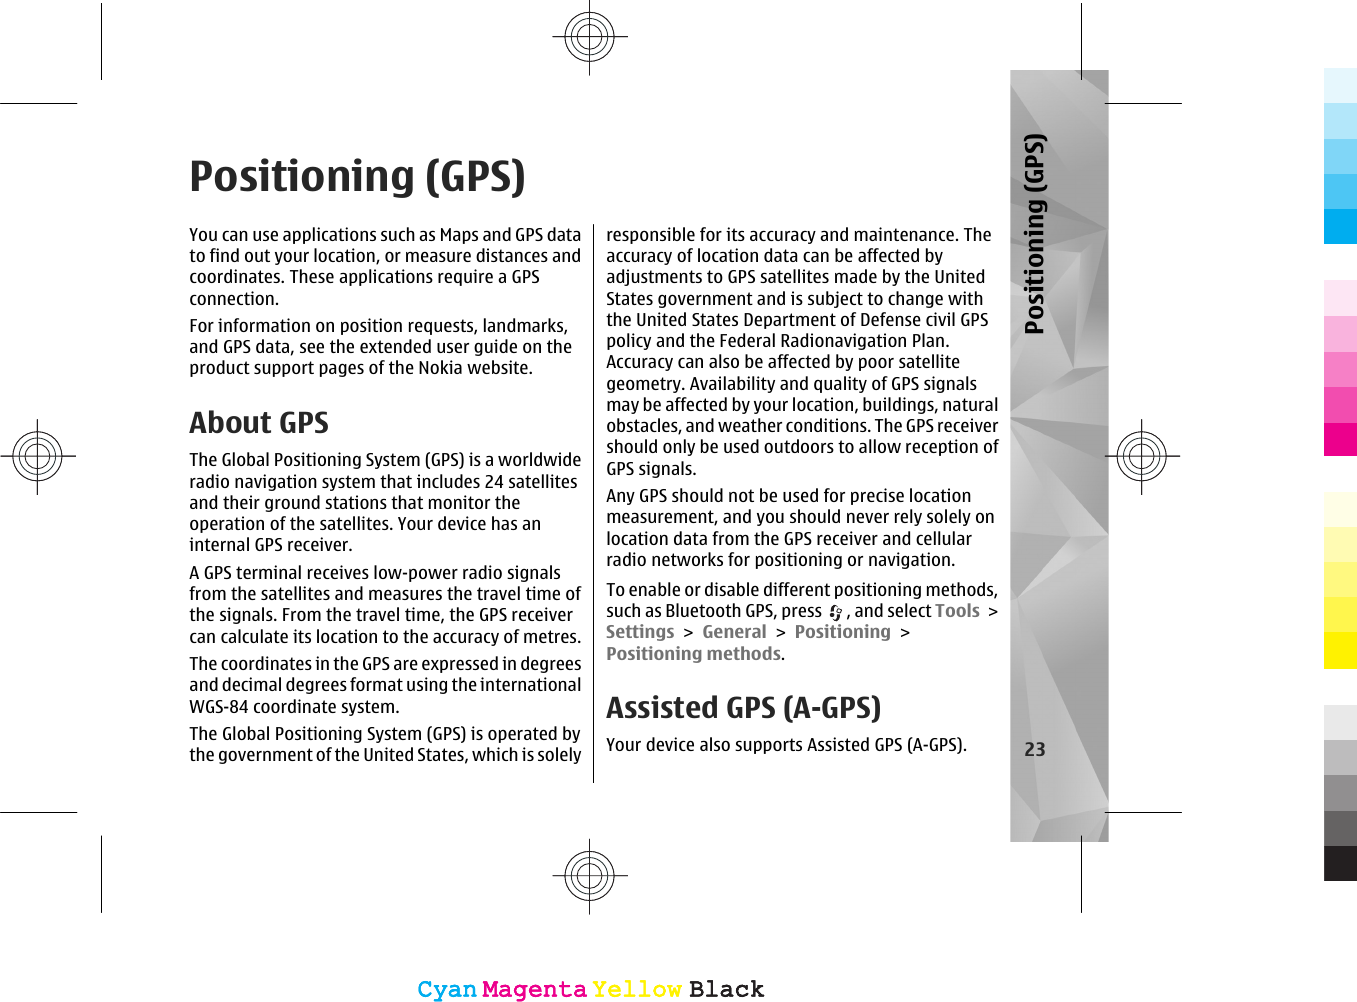 Positioning (GPS)You can use applications such as Maps and GPS datato find out your location, or measure distances andcoordinates. These applications require a GPSconnection.For information on position requests, landmarks,and GPS data, see the extended user guide on theproduct support pages of the Nokia website.About GPSThe Global Positioning System (GPS) is a worldwideradio navigation system that includes 24 satellitesand their ground stations that monitor theoperation of the satellites. Your device has aninternal GPS receiver.A GPS terminal receives low-power radio signalsfrom the satellites and measures the travel time ofthe signals. From the travel time, the GPS receivercan calculate its location to the accuracy of metres.The coordinates in the GPS are expressed in degreesand decimal degrees format using the internationalWGS-84 coordinate system.The Global Positioning System (GPS) is operated bythe government of the United States, which is solelyresponsible for its accuracy and maintenance. Theaccuracy of location data can be affected byadjustments to GPS satellites made by the UnitedStates government and is subject to change withthe United States Department of Defense civil GPSpolicy and the Federal Radionavigation Plan.Accuracy can also be affected by poor satellitegeometry. Availability and quality of GPS signalsmay be affected by your location, buildings, naturalobstacles, and weather conditions. The GPS receivershould only be used outdoors to allow reception ofGPS signals.Any GPS should not be used for precise locationmeasurement, and you should never rely solely onlocation data from the GPS receiver and cellularradio networks for positioning or navigation.To enable or disable different positioning methods,such as Bluetooth GPS, press  , and select Tools &gt;Settings &gt; General &gt; Positioning &gt;Positioning methods.Assisted GPS (A-GPS)Your device also supports Assisted GPS (A-GPS). 23Positioning (GPS)CyanCyanMagentaMagentaYellowYellowBlackBlackCyanCyanMagentaMagentaYellowYellowBlackBlack